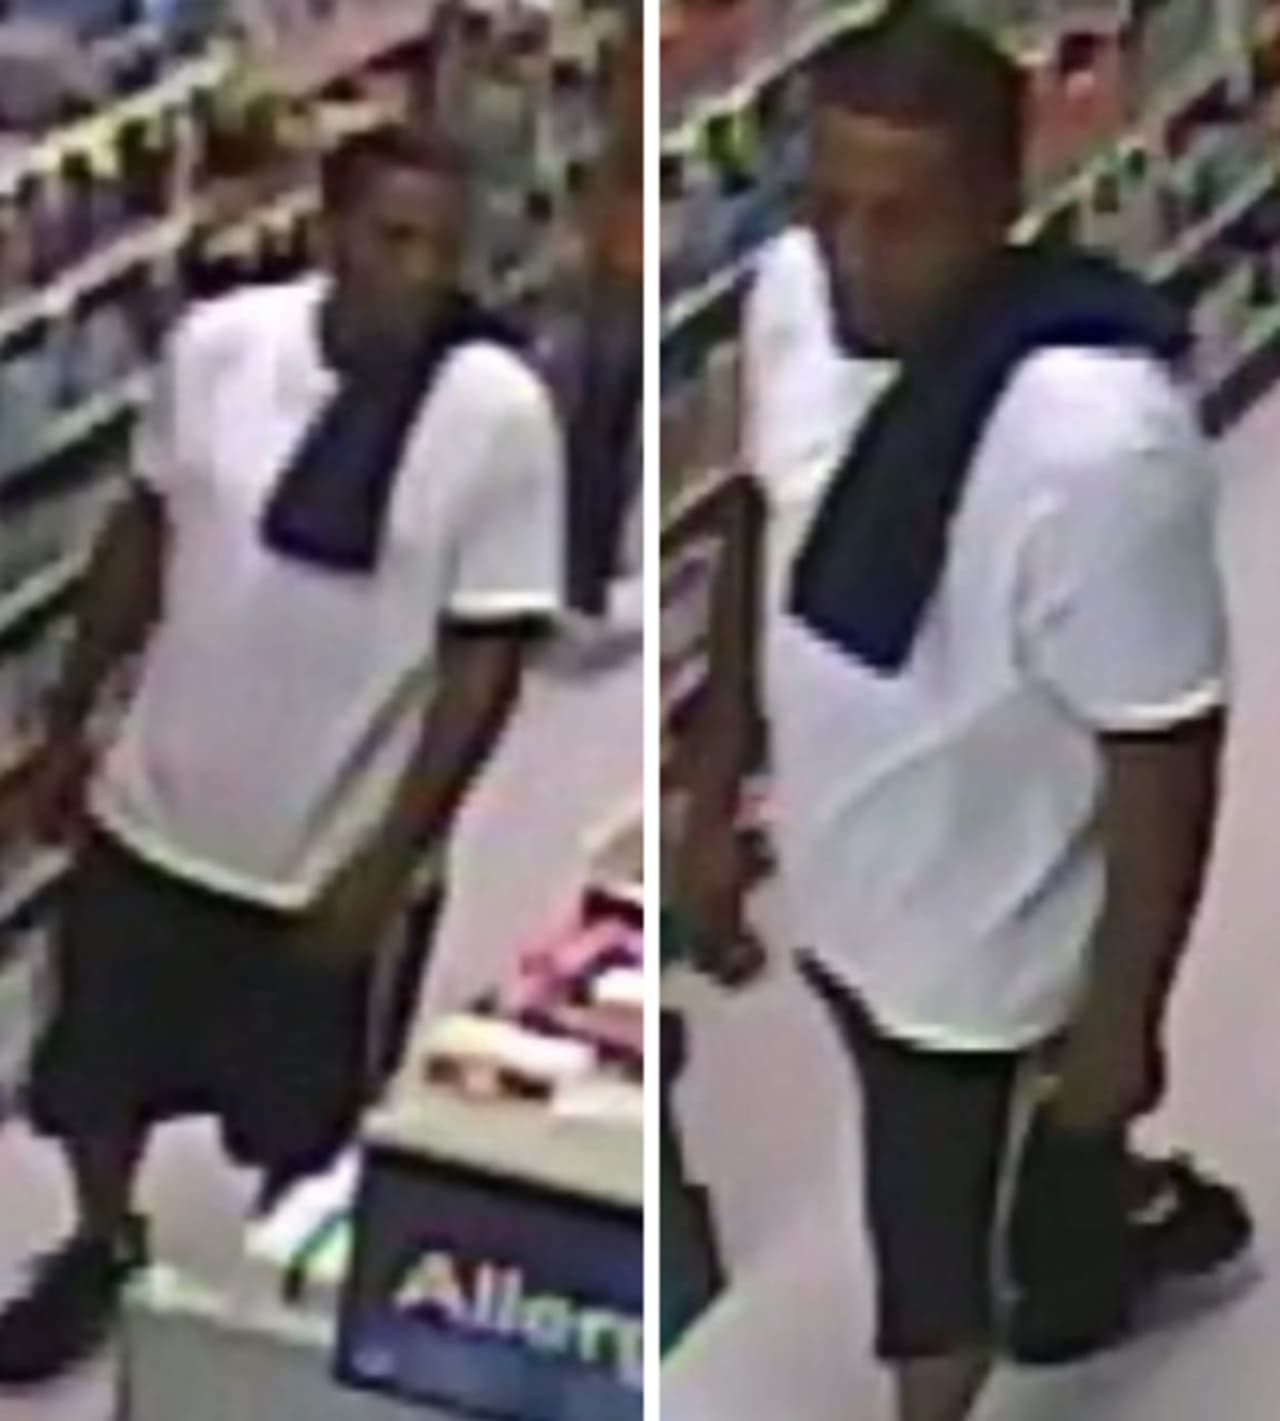 Police are on the lookout for a man suspected of stealing $800 worth of Sudafed from Rite Aid in Shirley (809 Montauk Highway) on Friday, Aug. 9 around 3 p.m.